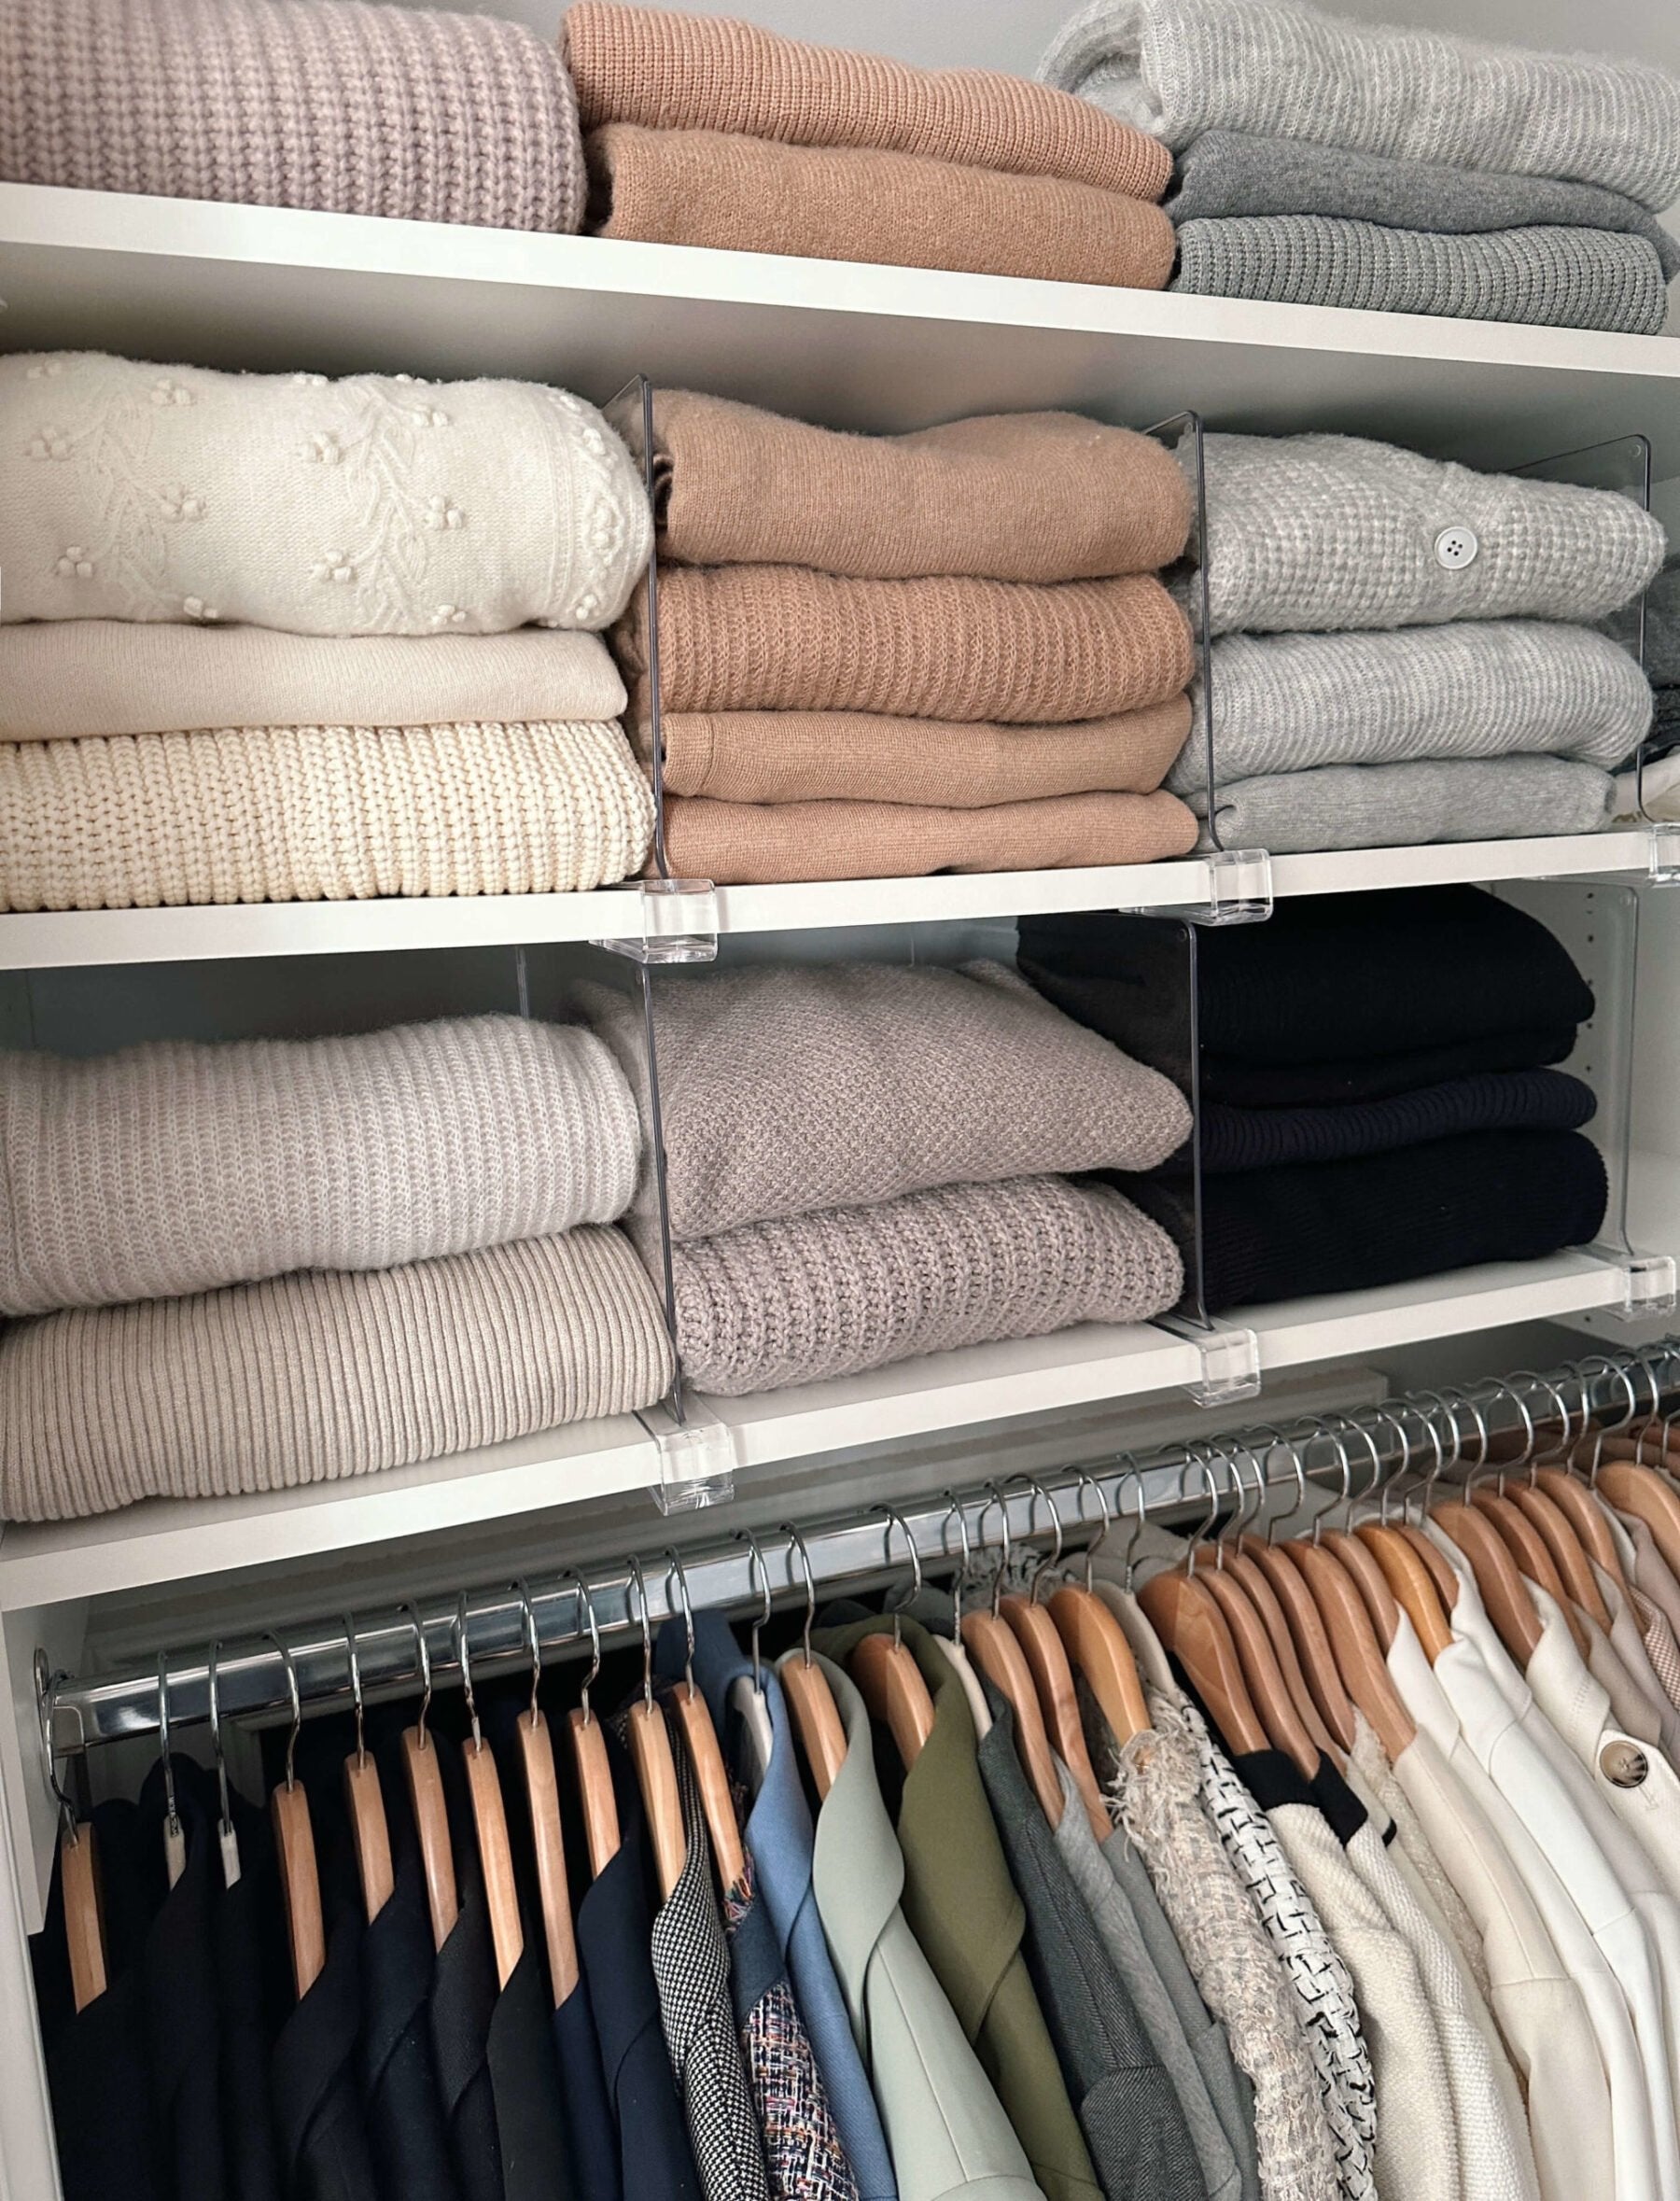 How To Store Sweaters And Cardigans?